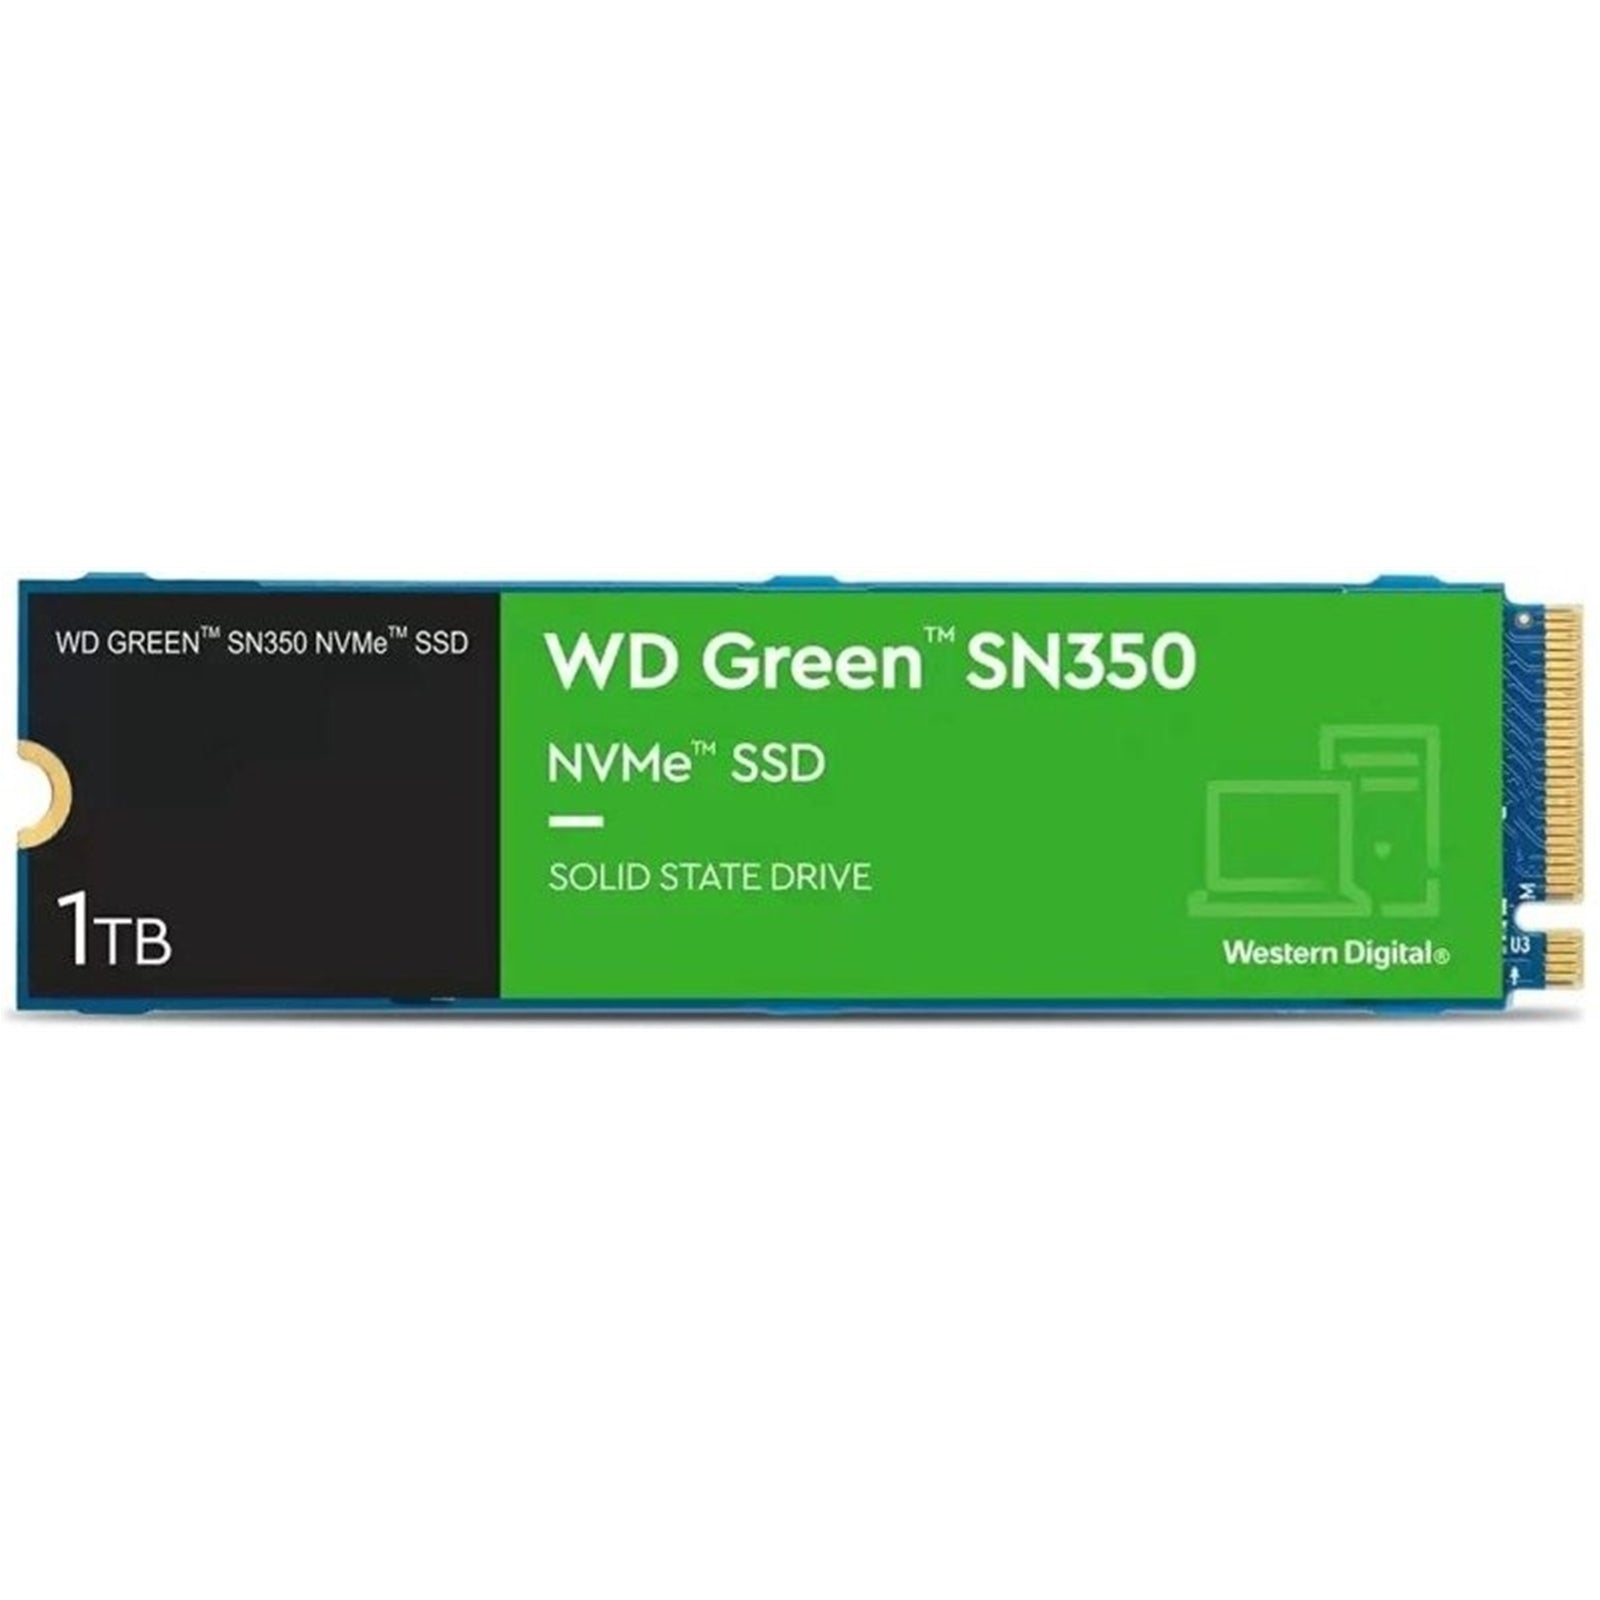 WD Green SN350 1TB NVMe SSD - High-Speed, Reliable, and Compact Storage